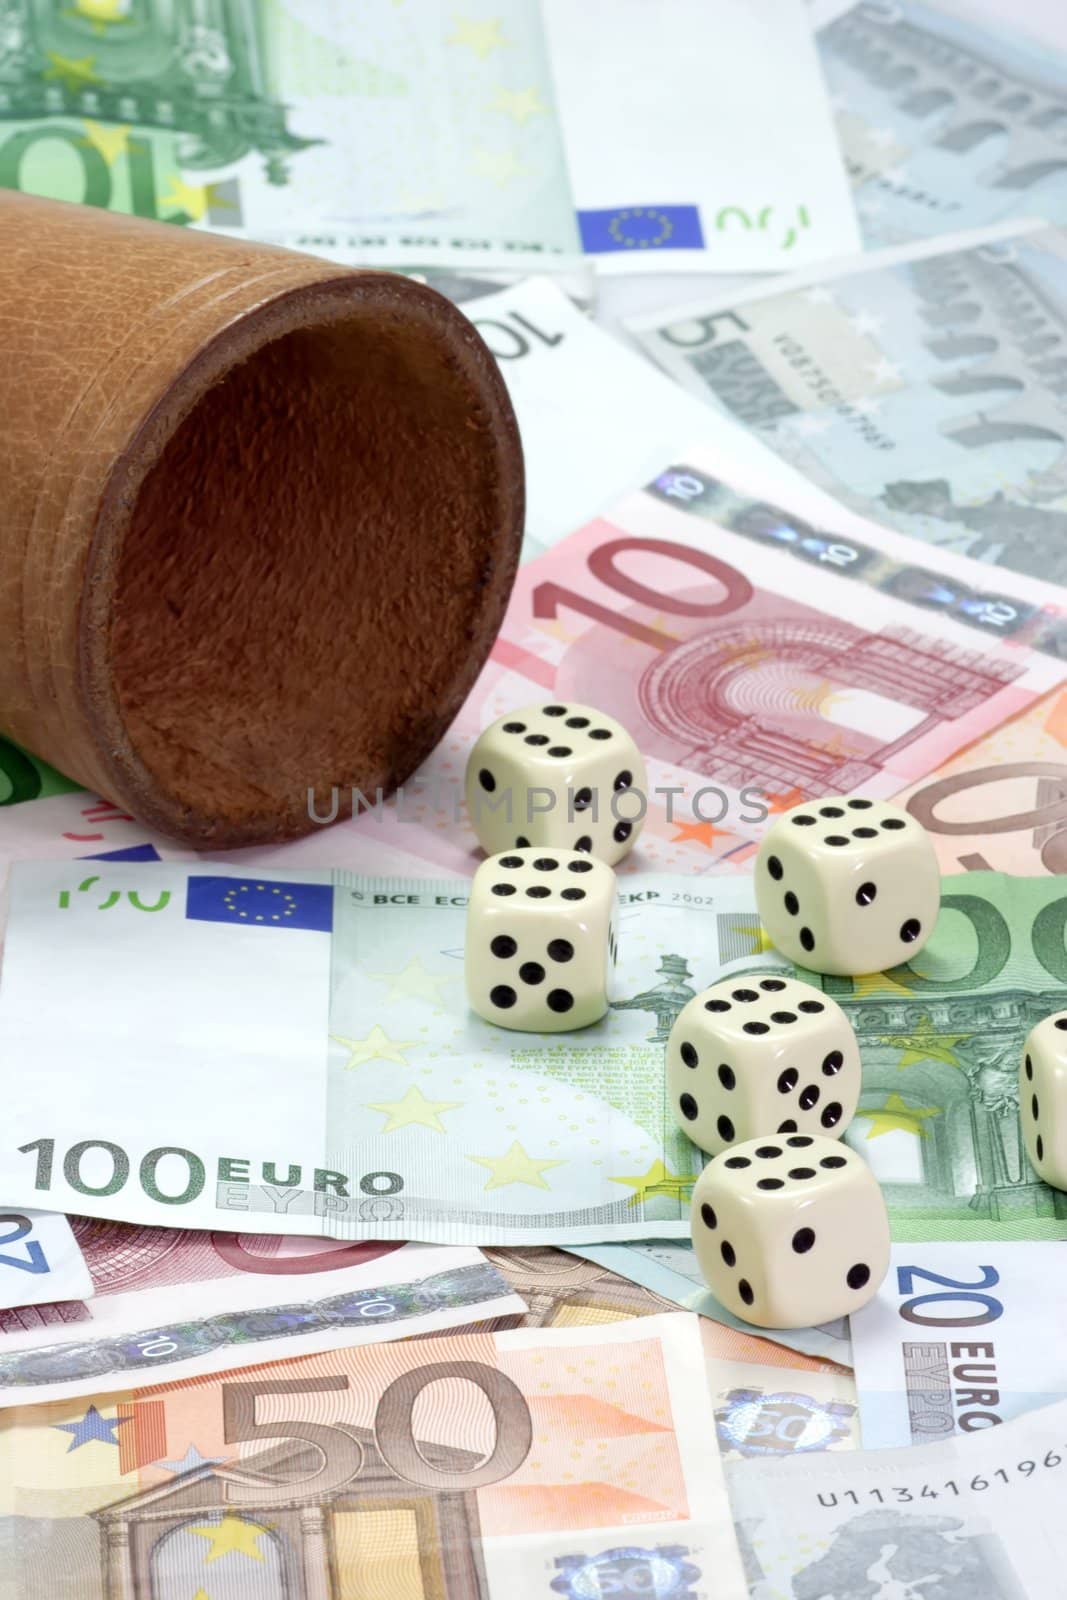 Dice shaker and dices on euro notes